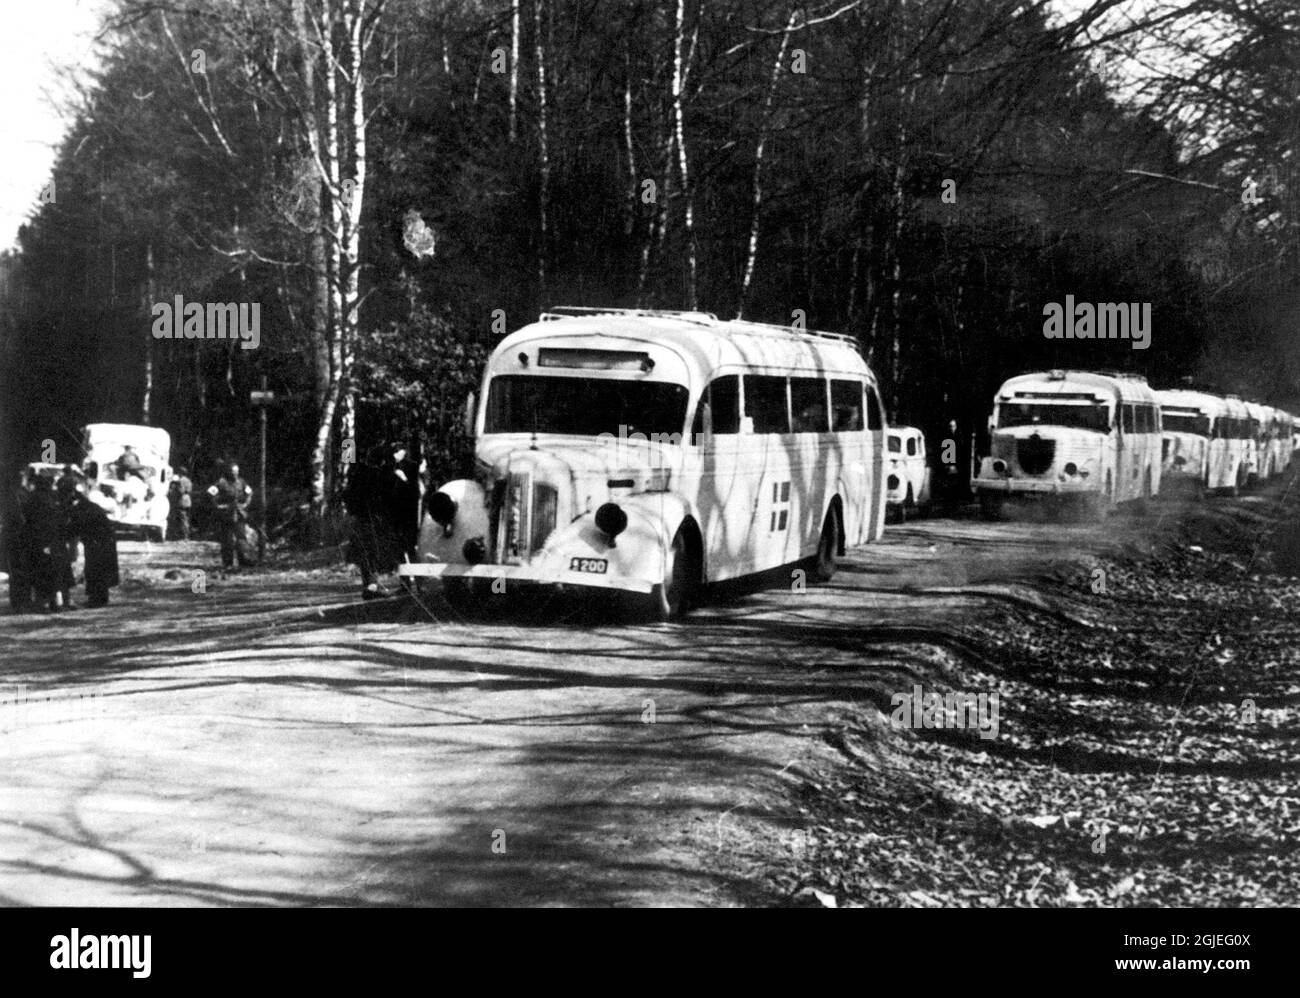 The Swedish Red cross White busses, organized by Swedish red Croww Chairman Count Folke Bernadotte whiched helped people to escape Germany during the final stage of the second world war Stock Photo